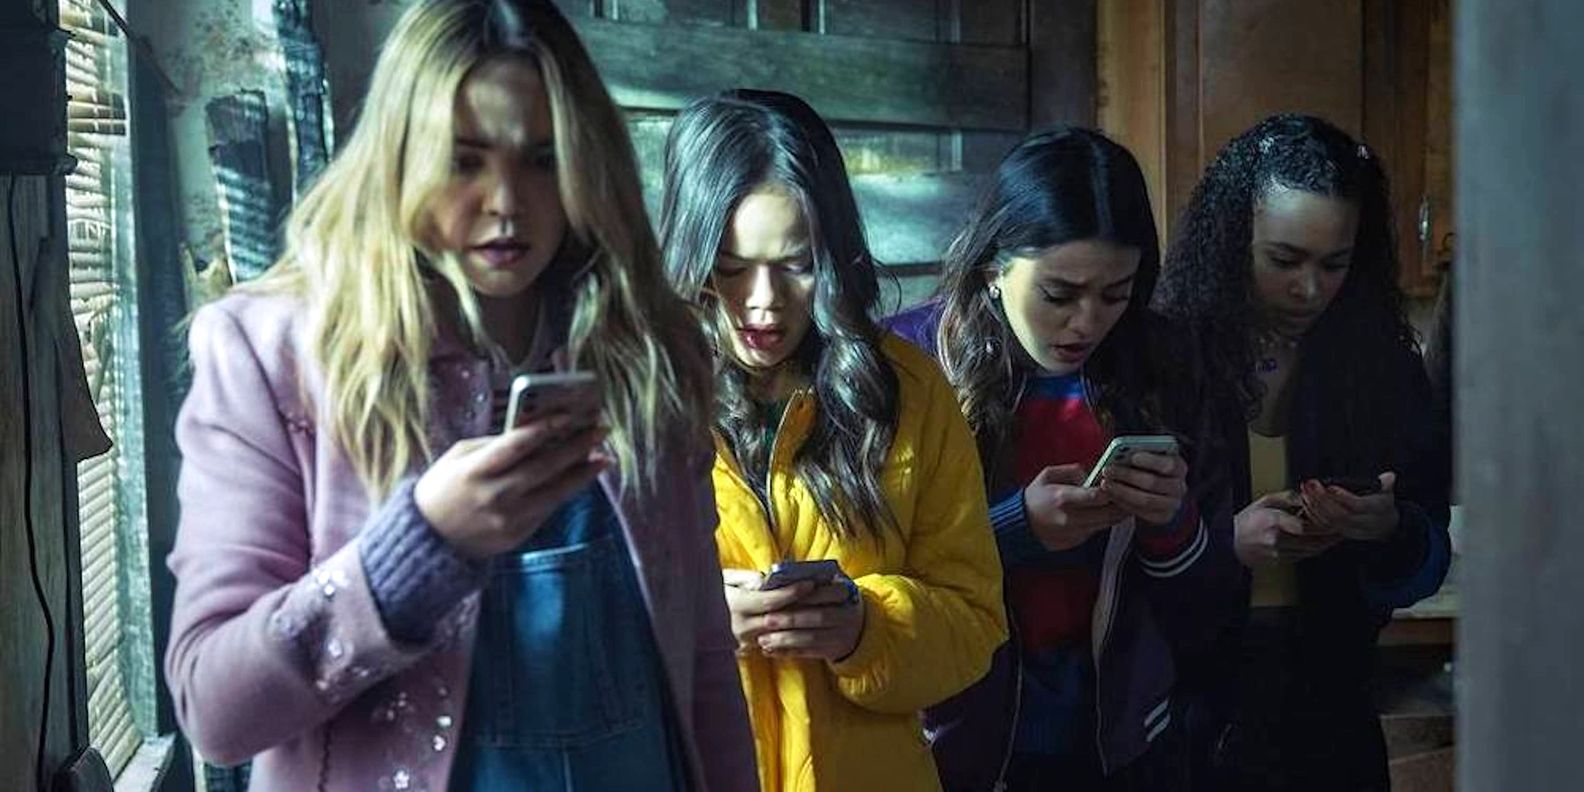 Pretty Little Liars Original Sin characters looking at their phones scared